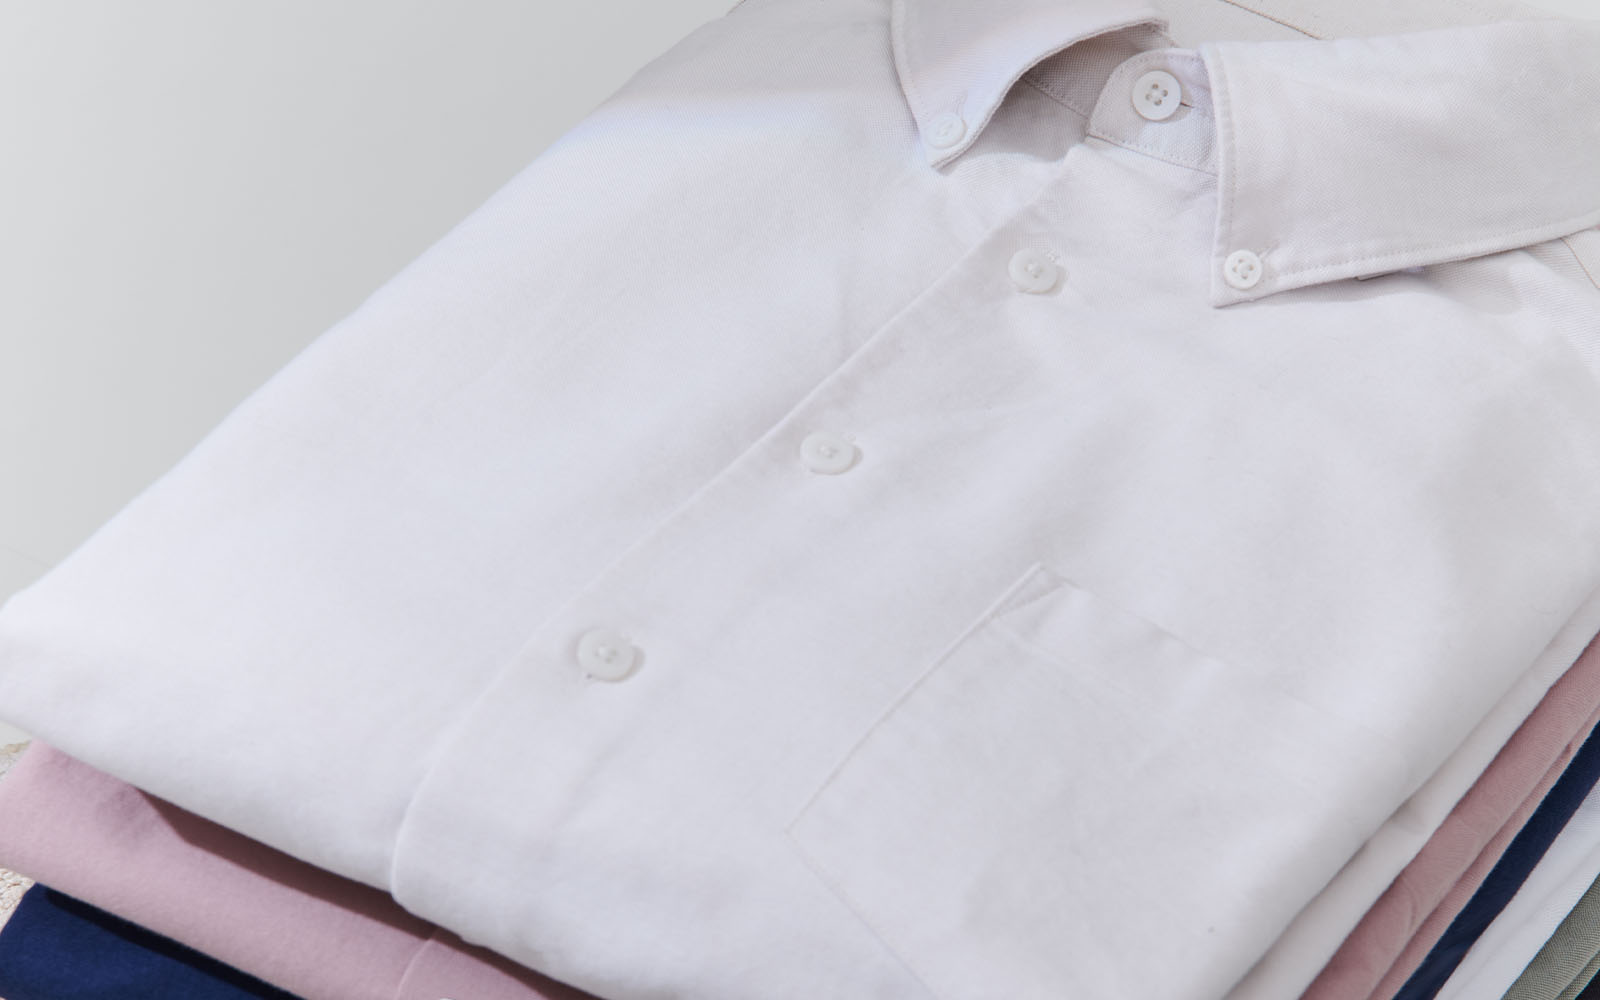 Dress shirt collar styles, the complete guide: from casual to